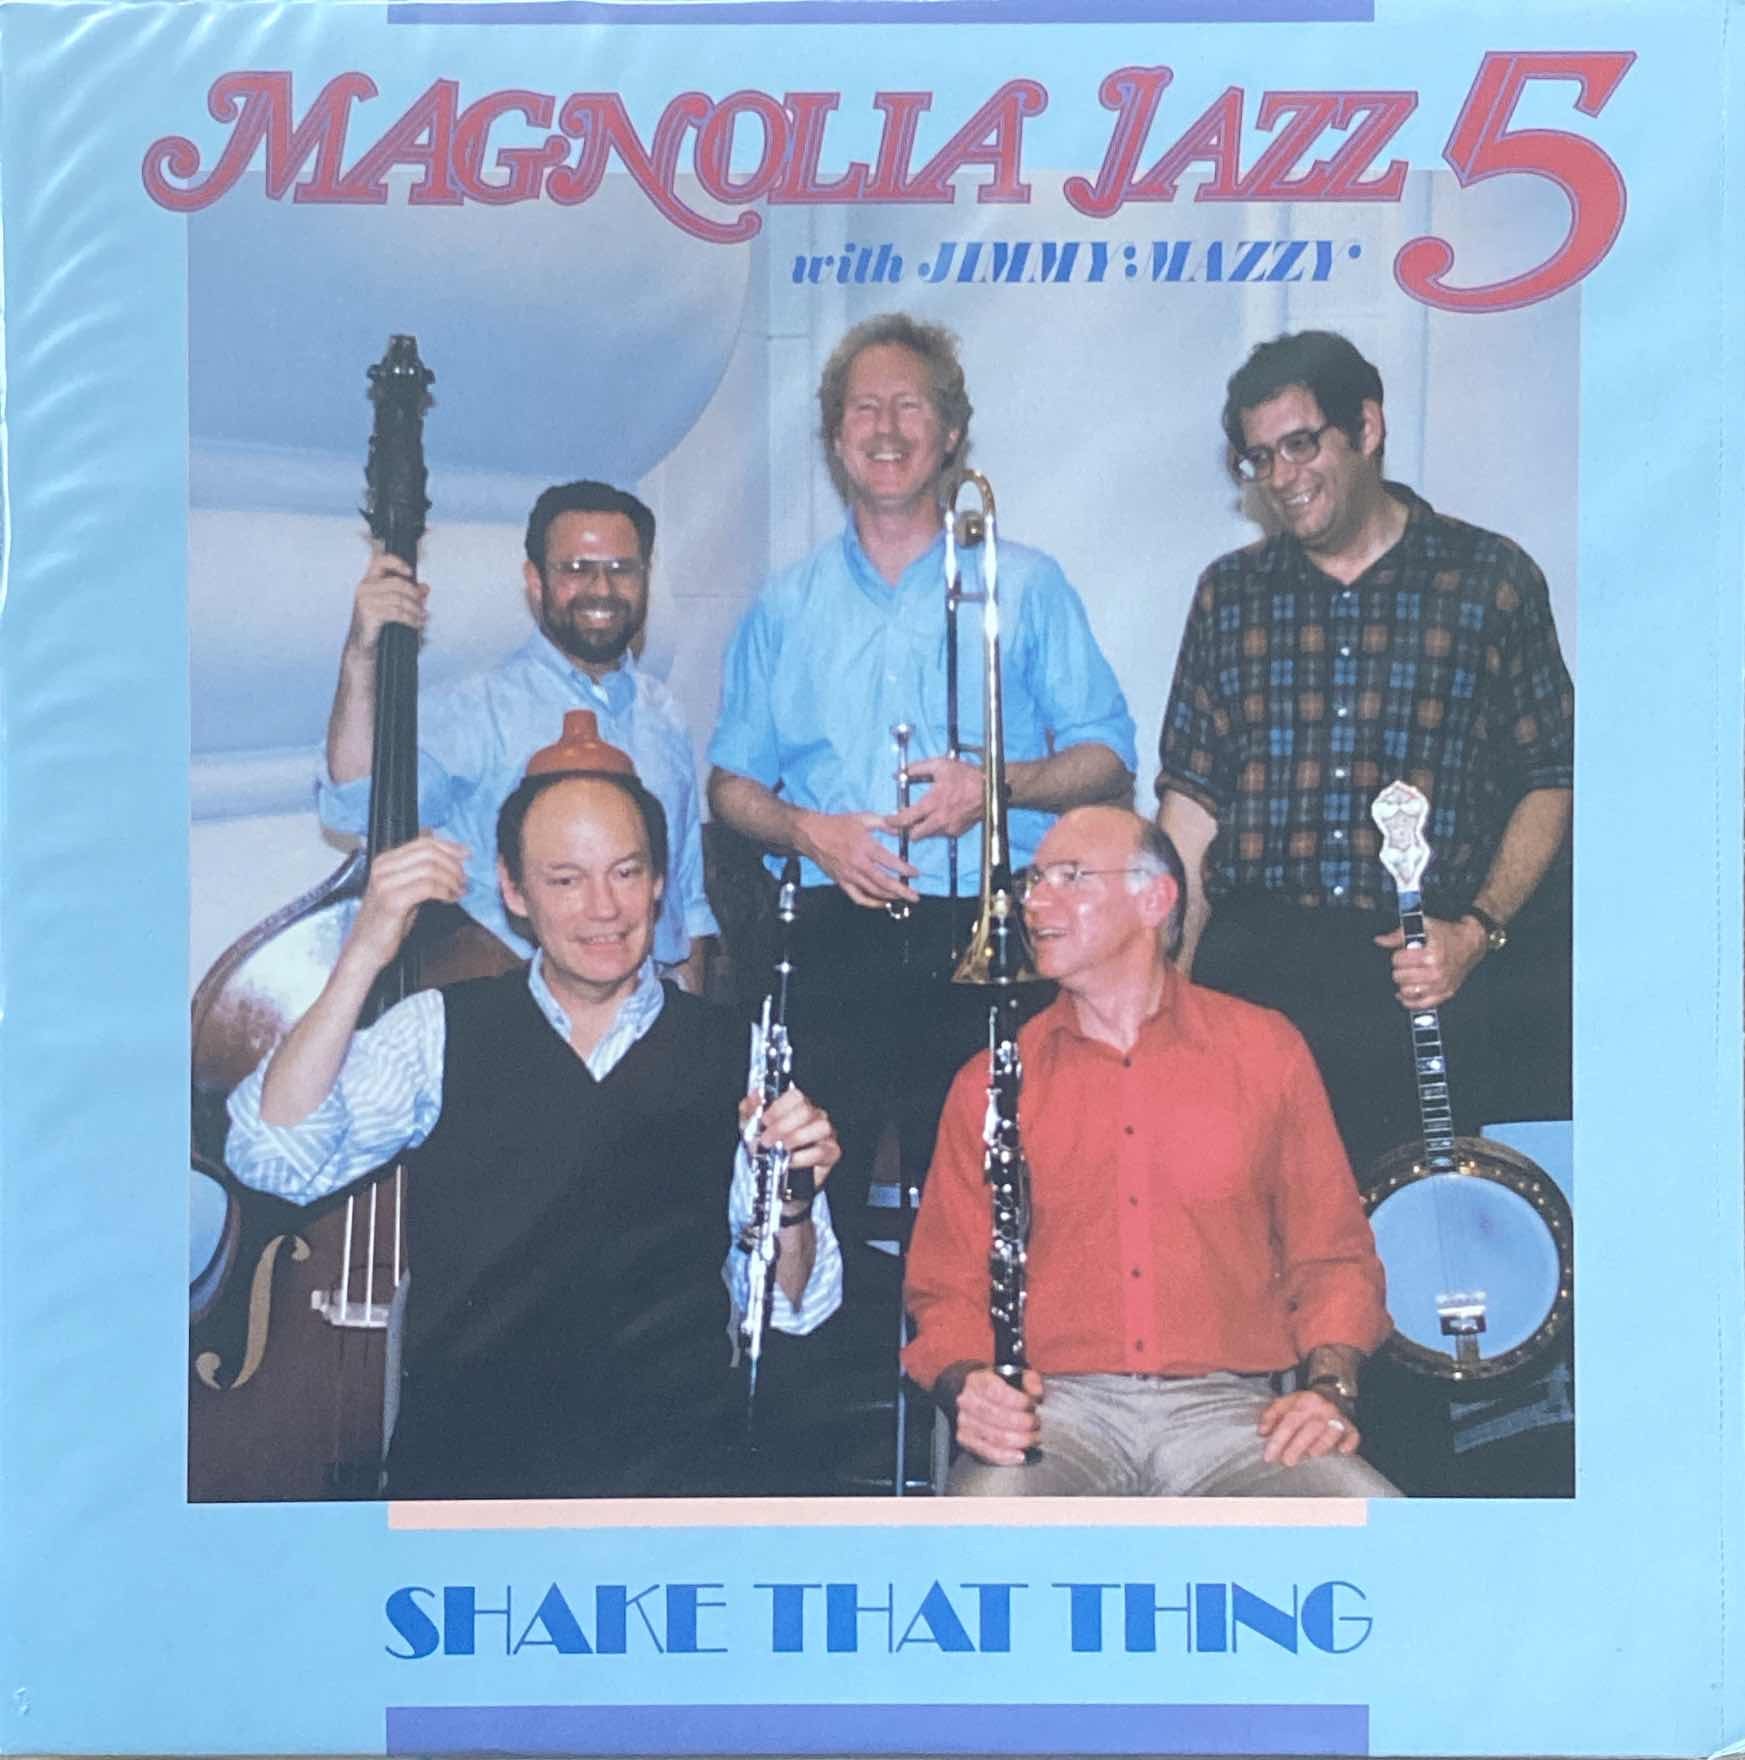 Jimmy Mazzy and Magnolia Jazz 5- Shake That Thing